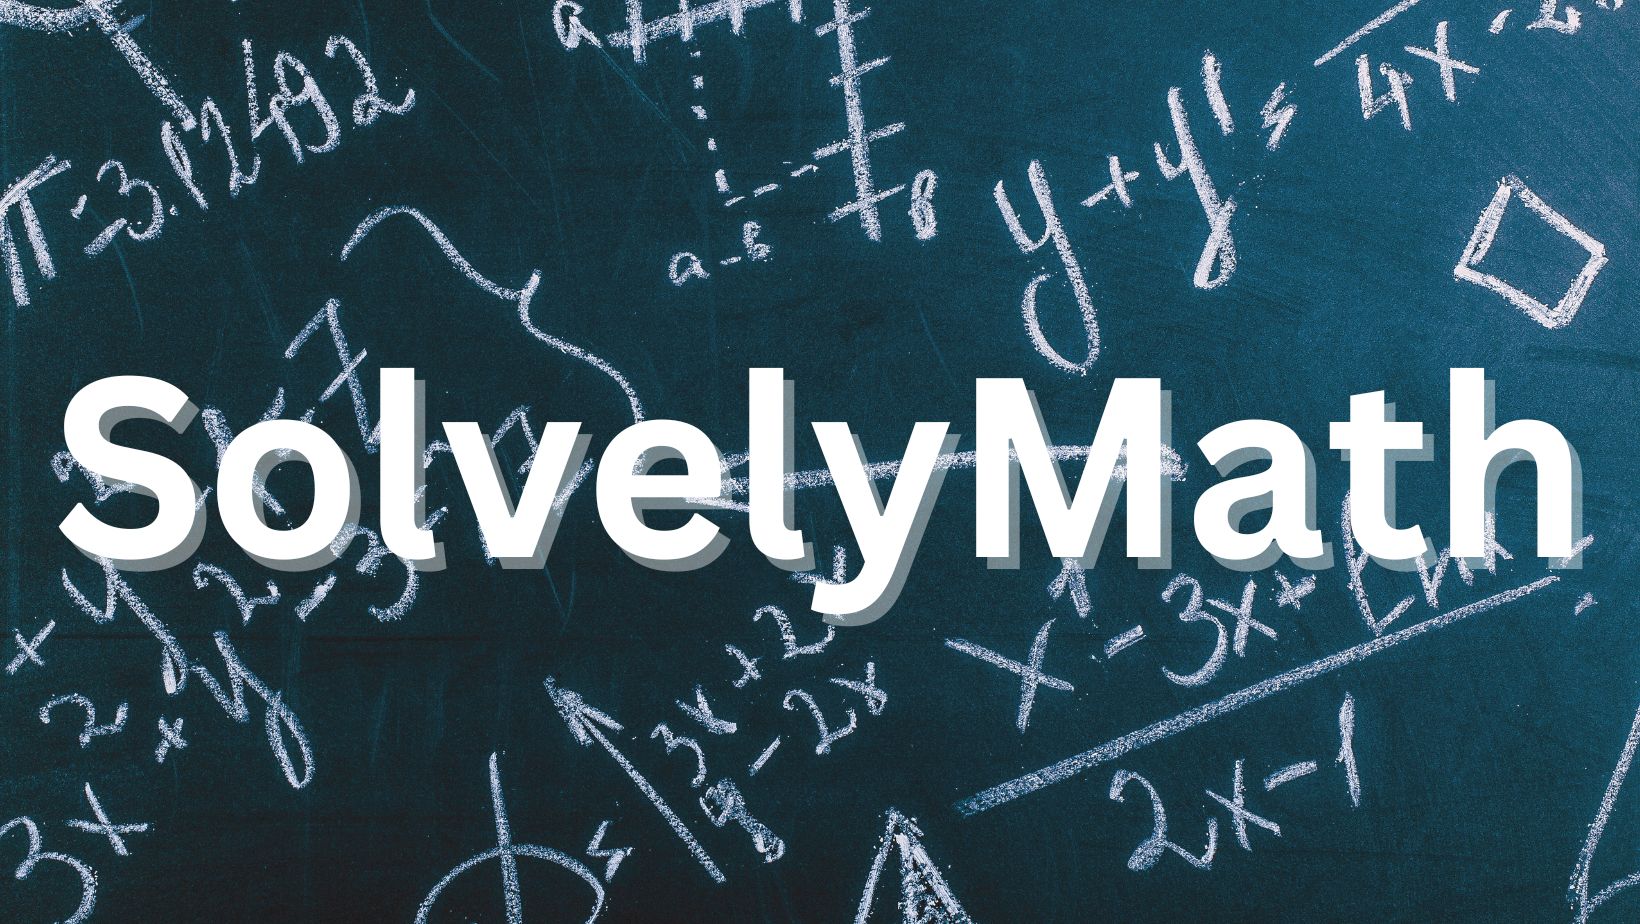 Some Top Benefits of Using SolvelyMath